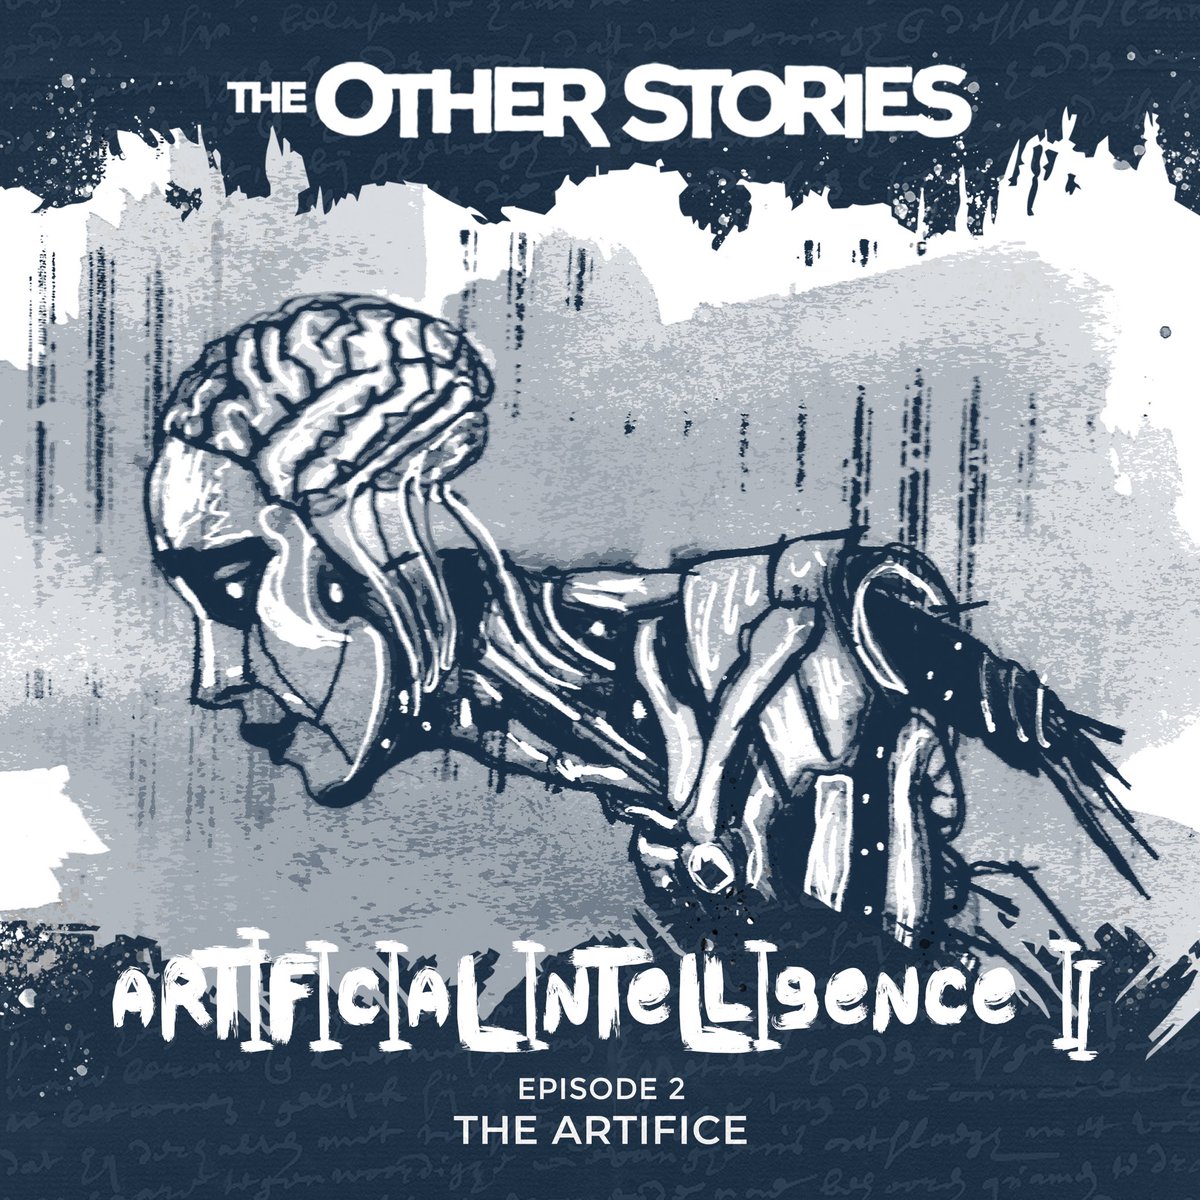 #TheOtherStories | Artificial Intelligence II | Episode 2 'The Artifice' is written and narrated by the birthday boy @LukeofKondor, plus produced by @karlhughes. Artwork - @CarrionHouse | Music - Chris Zabriskie & @thomrobsonmusic theotherstories.net